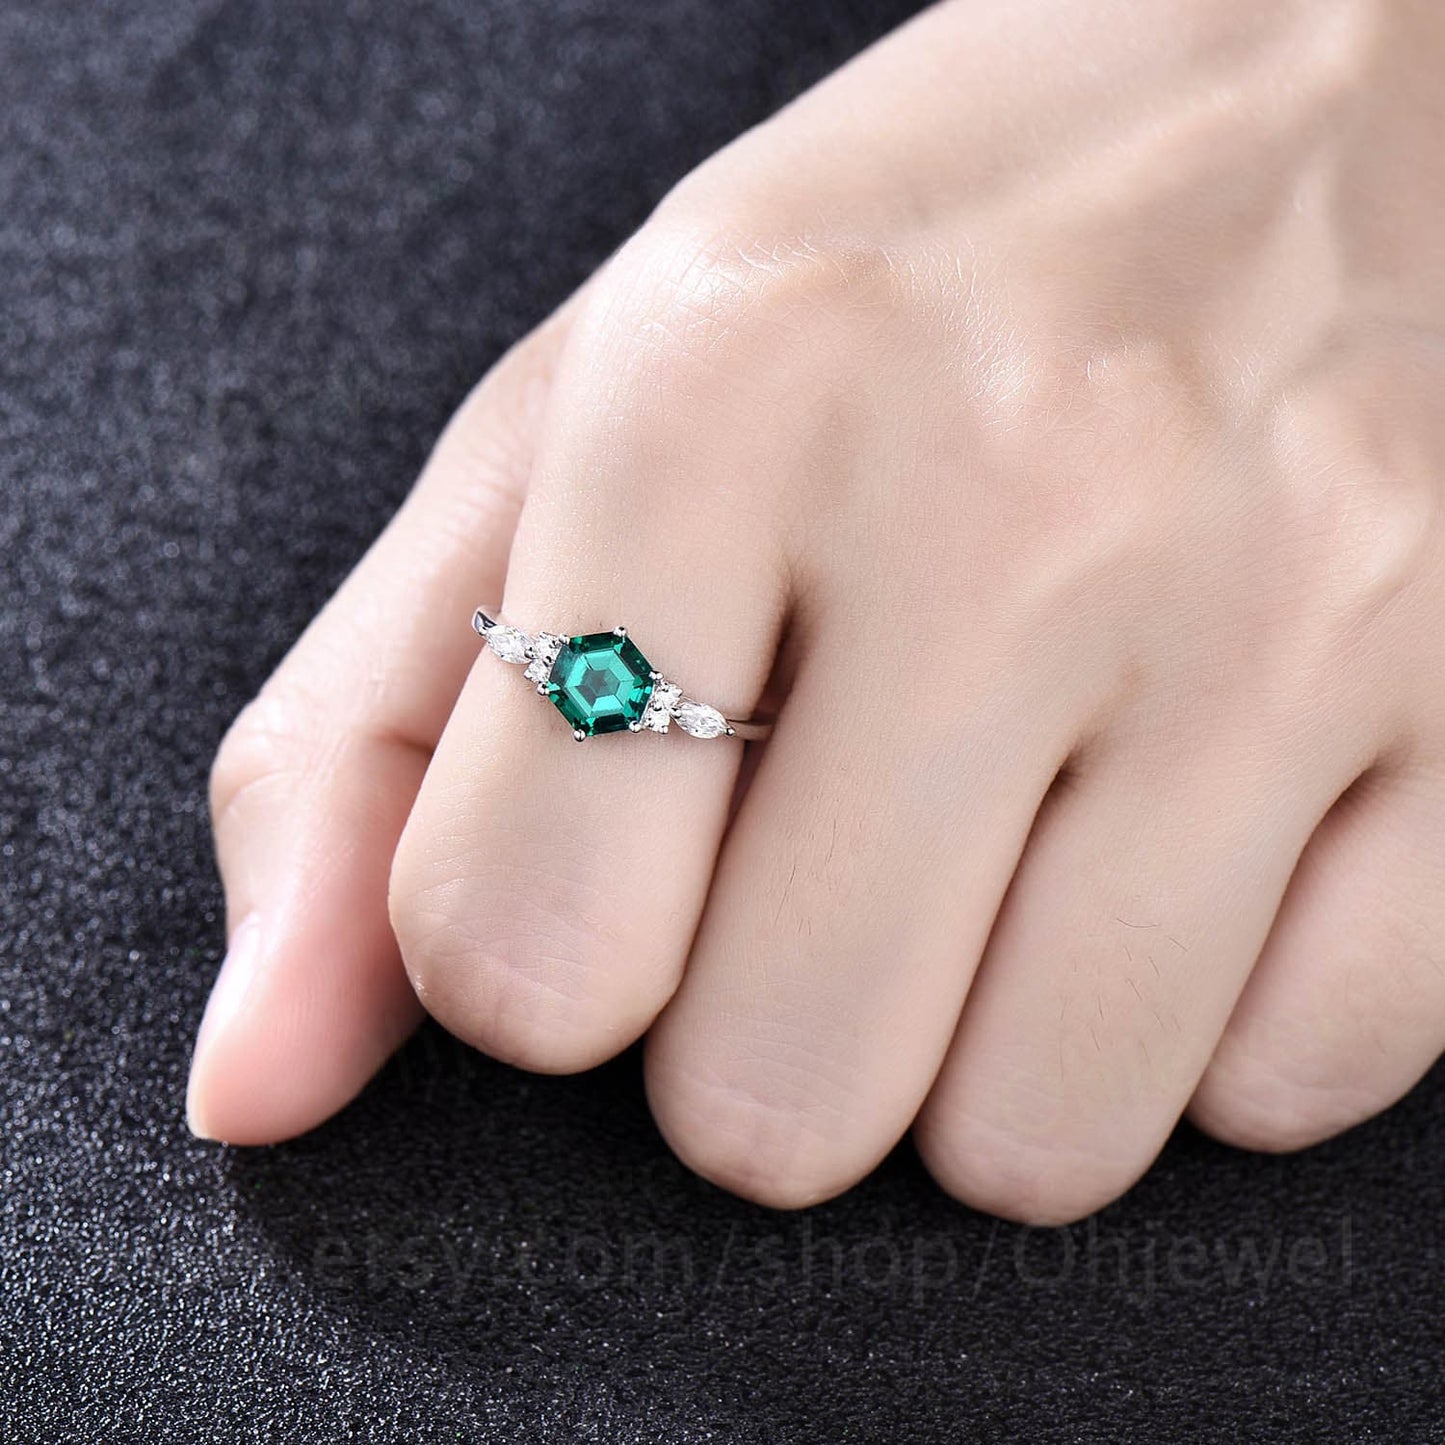 Hexagon emerald ring dainty vintage emerald engagement ring 7 stone marquise moissanite ring rose gold silver for women bridal promise ring